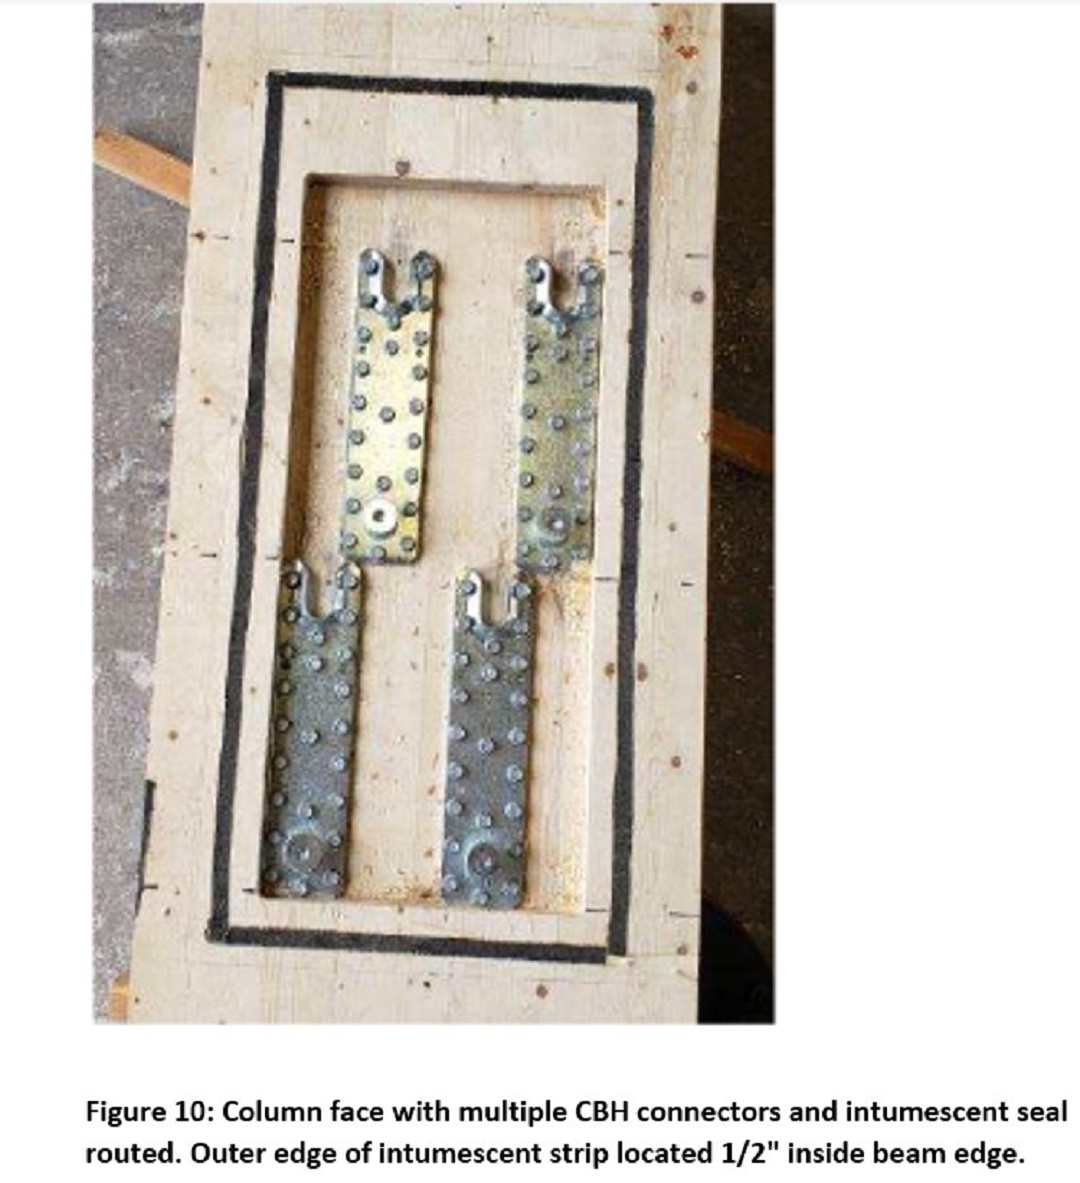 Figure 10: Column face with multiple CBH connectors and intumescent seal routed. Outer edge of intumescent strip located 1/2" inside beam edge. 